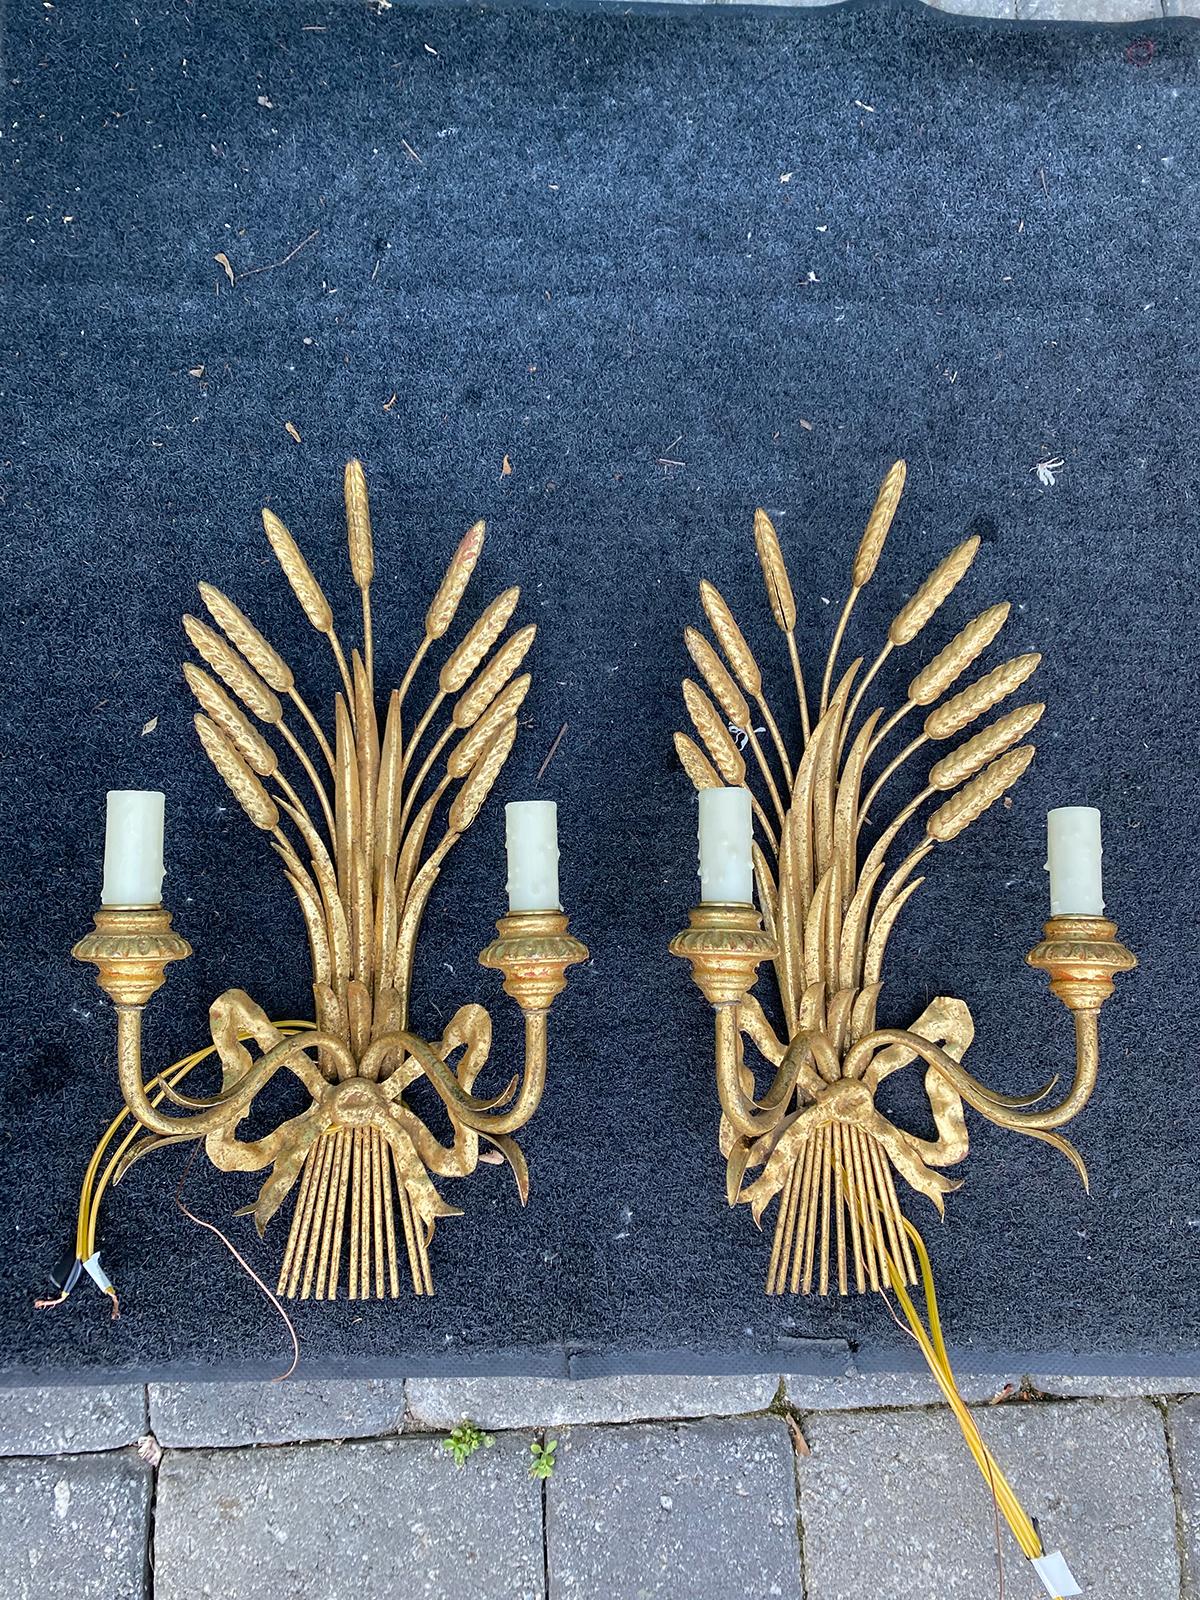 Pair of Mid-20th century Italian giltwood sheaf of wheat 2 arm sconces
New wiring.